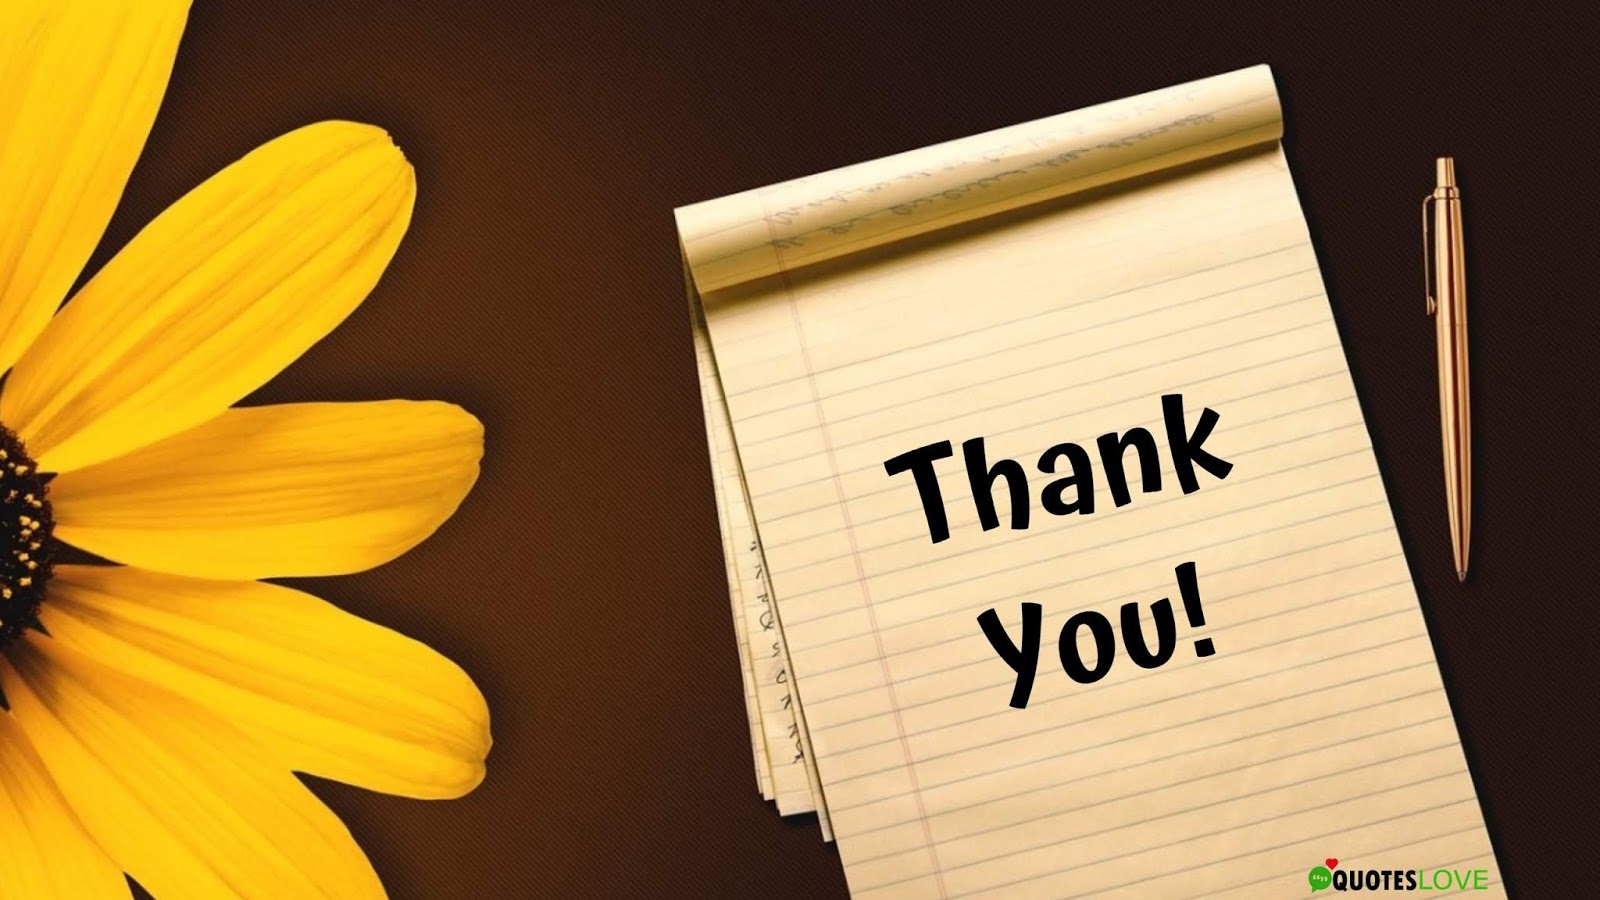 41+ (Best) Inspirational Quotes For Employee Appreciation Sayings To Thank Them